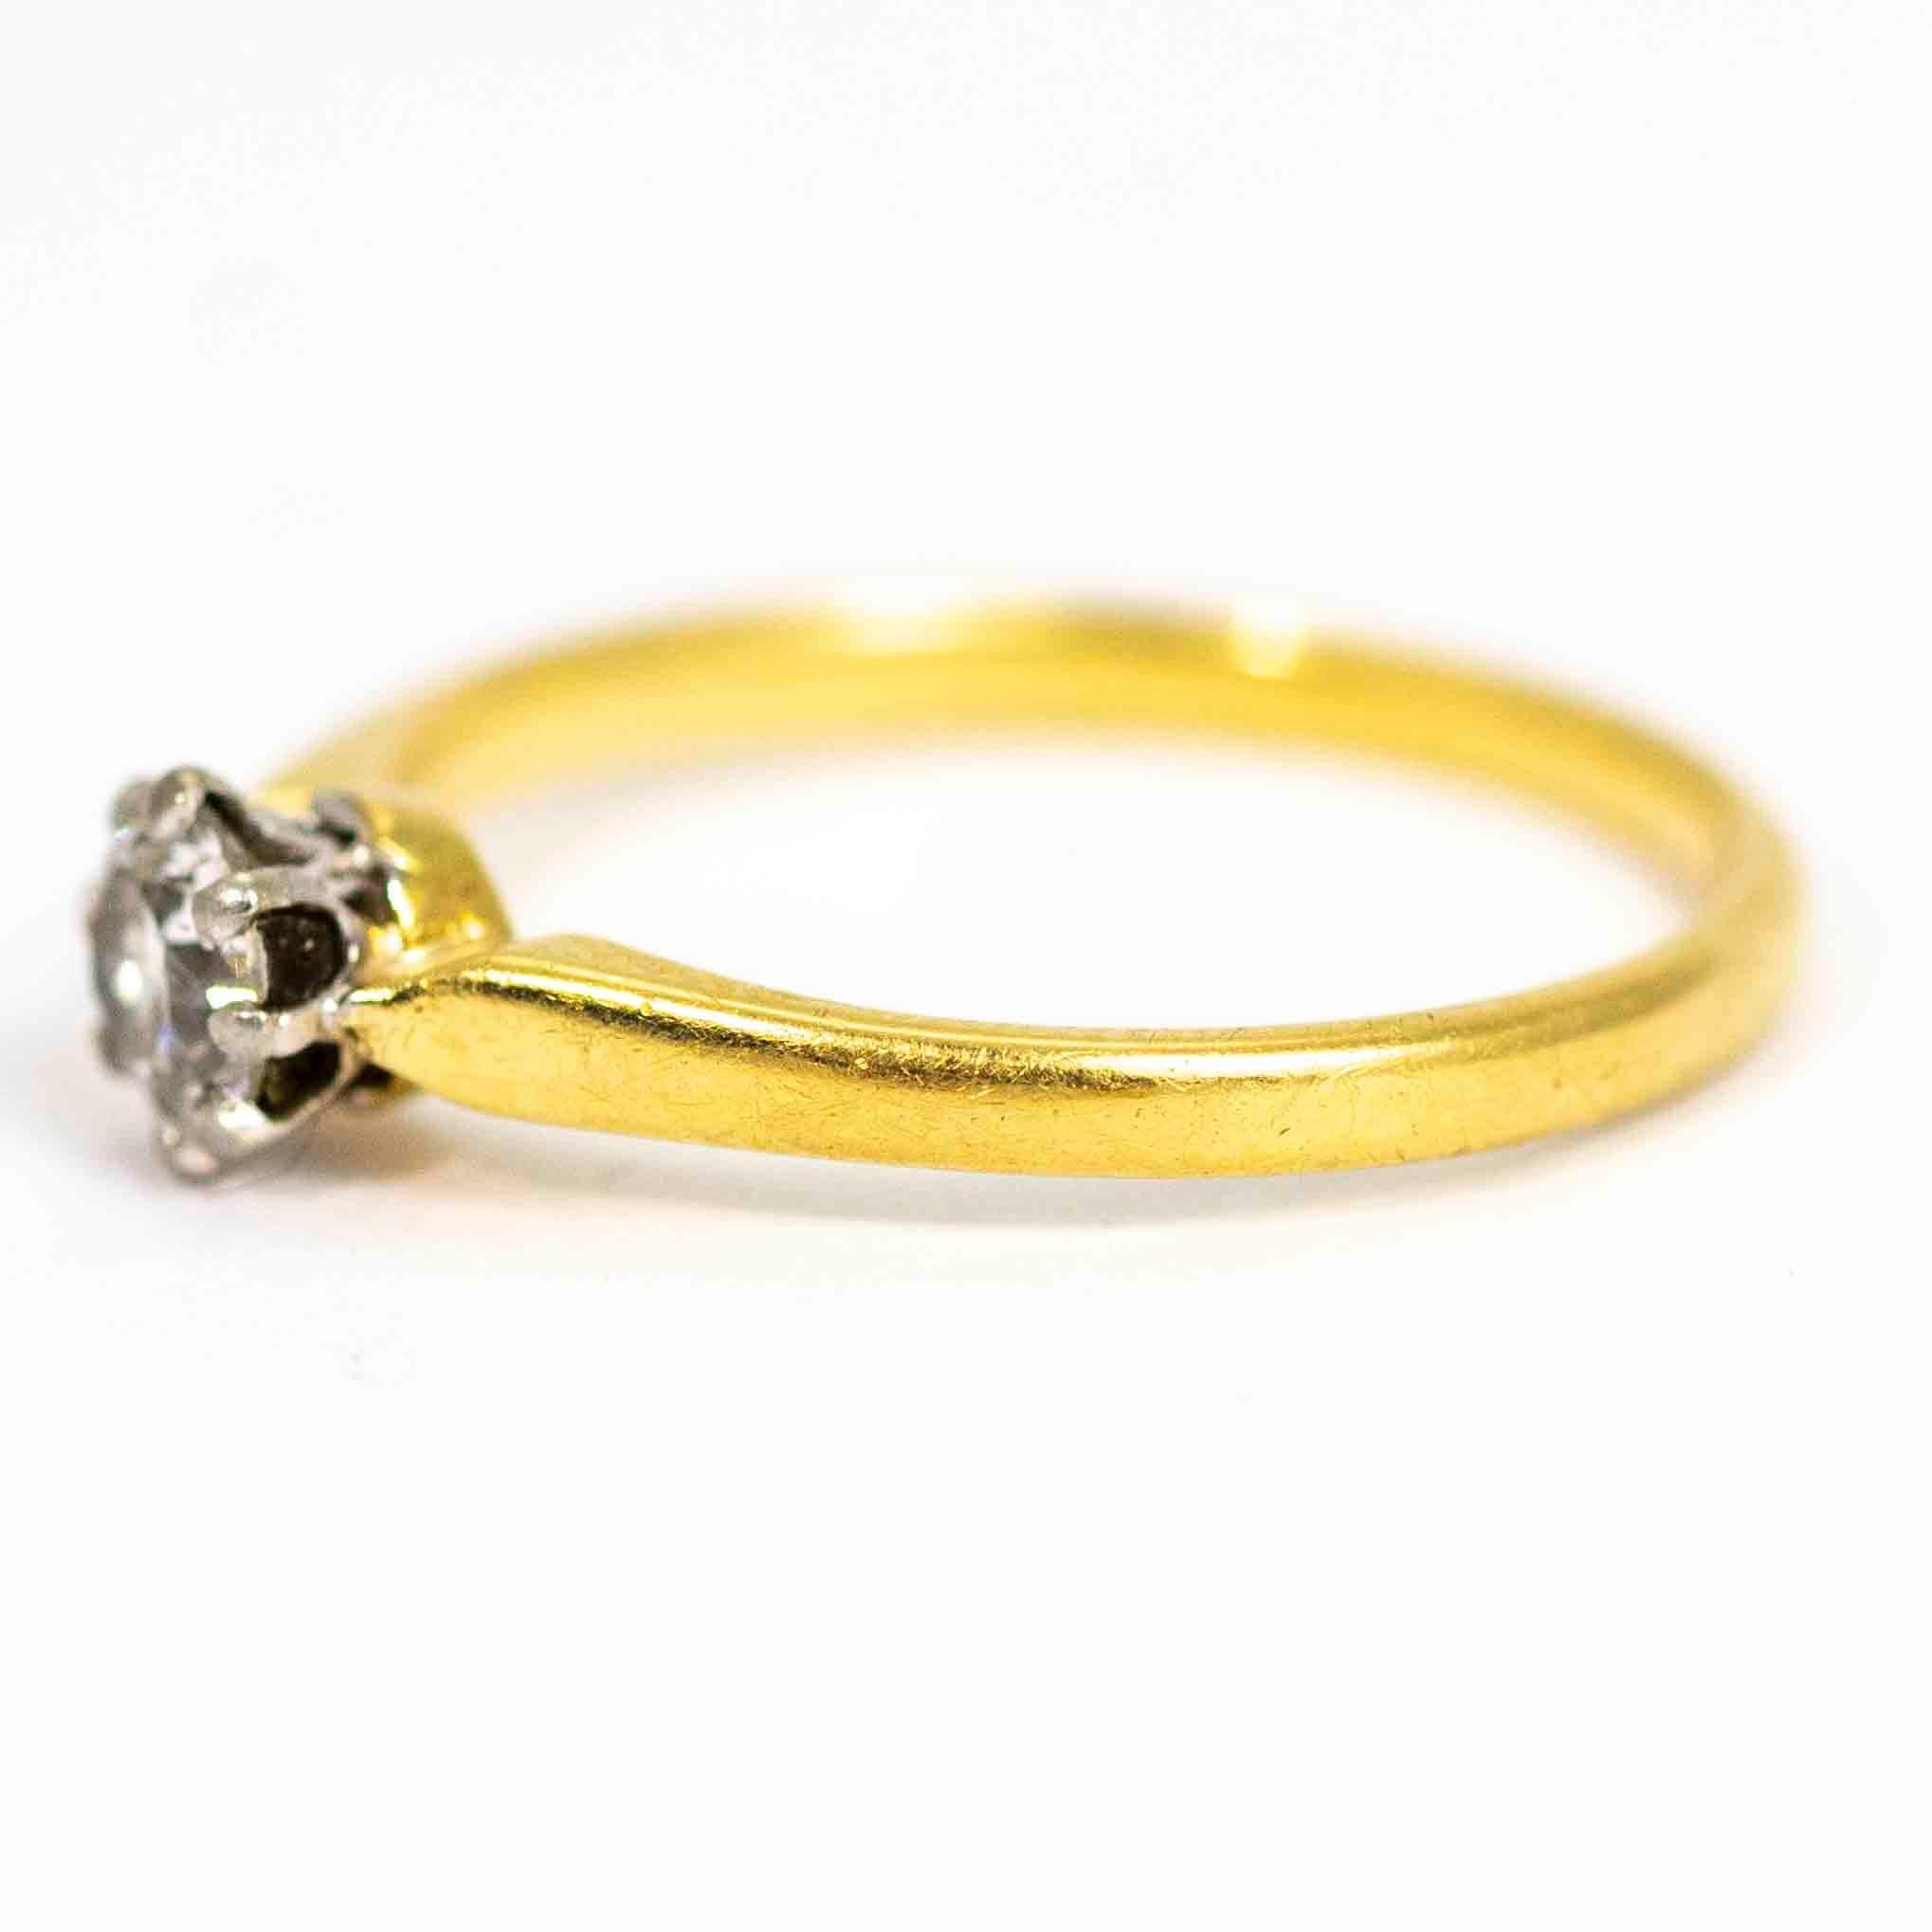 A superb vintage solitaire ring set with a beautiful round cut diamond, measuring approximately 35 points.  The stone sits in a fine platinum claw setting. Modelled in 18 carat yellow gold.

Ring Size: UK N 1/2, US 7
